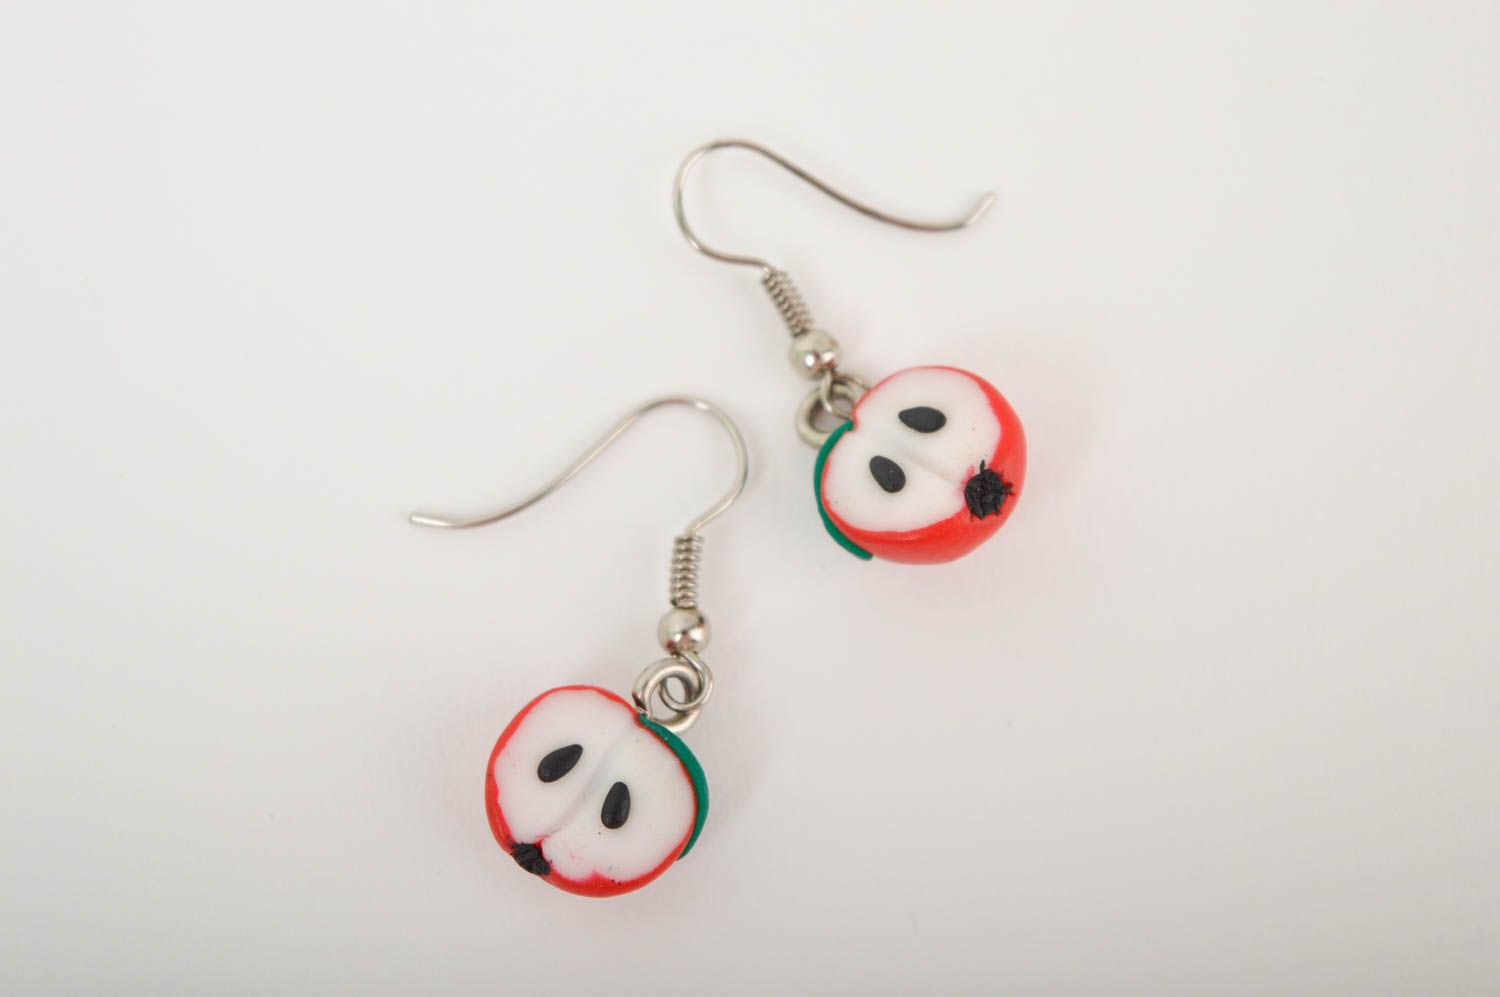 Stylish handmade plastic earrings polymer clay ideas accessories for girls photo 4